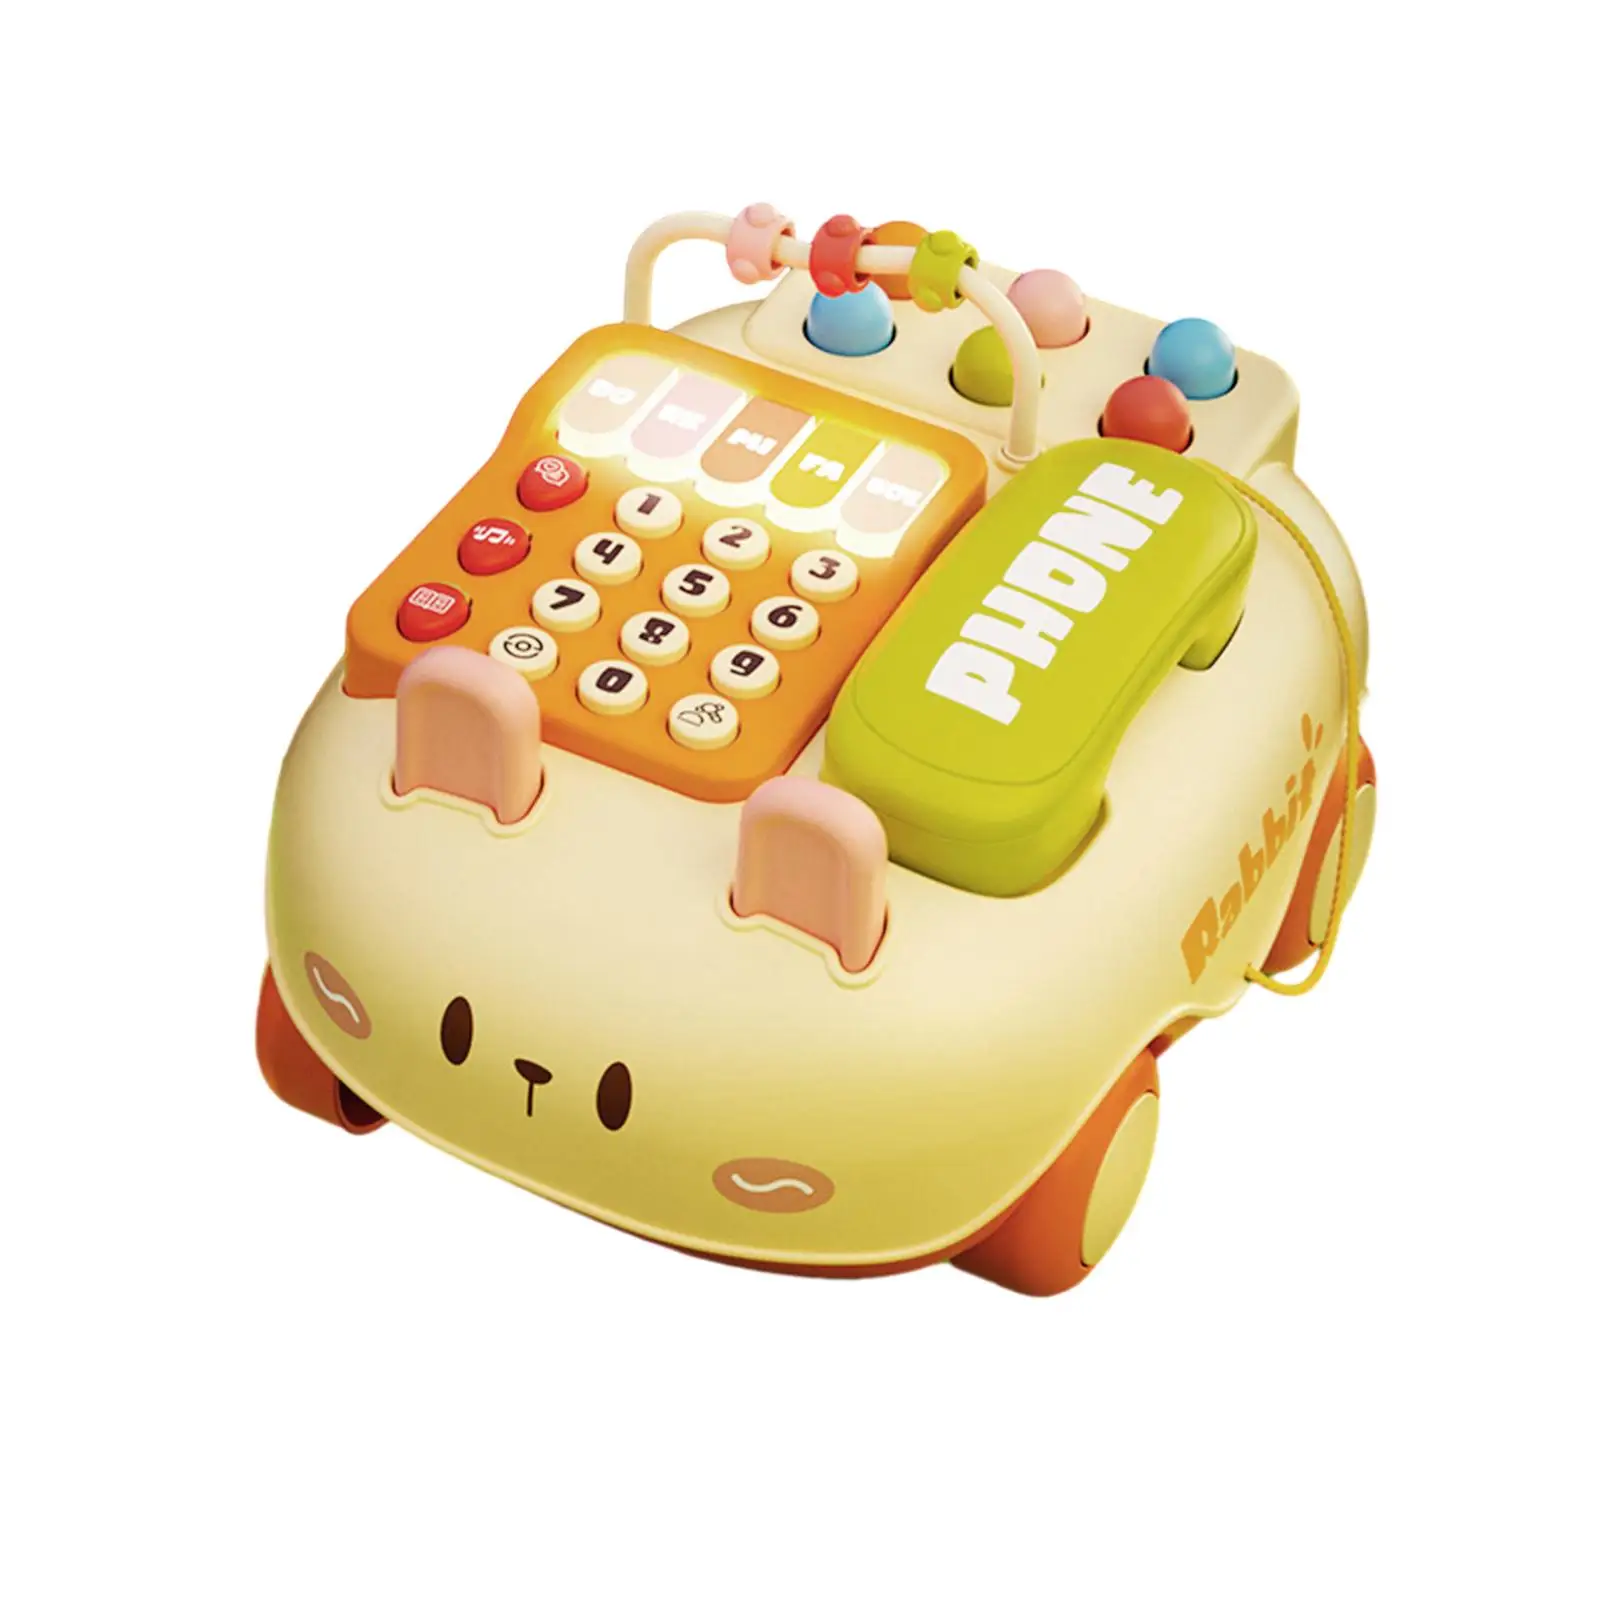 Simulation Phone Toys Game Early Education Music Light Toy Multifunction Telephone Story Toy for Children Toddler Birthday Gift